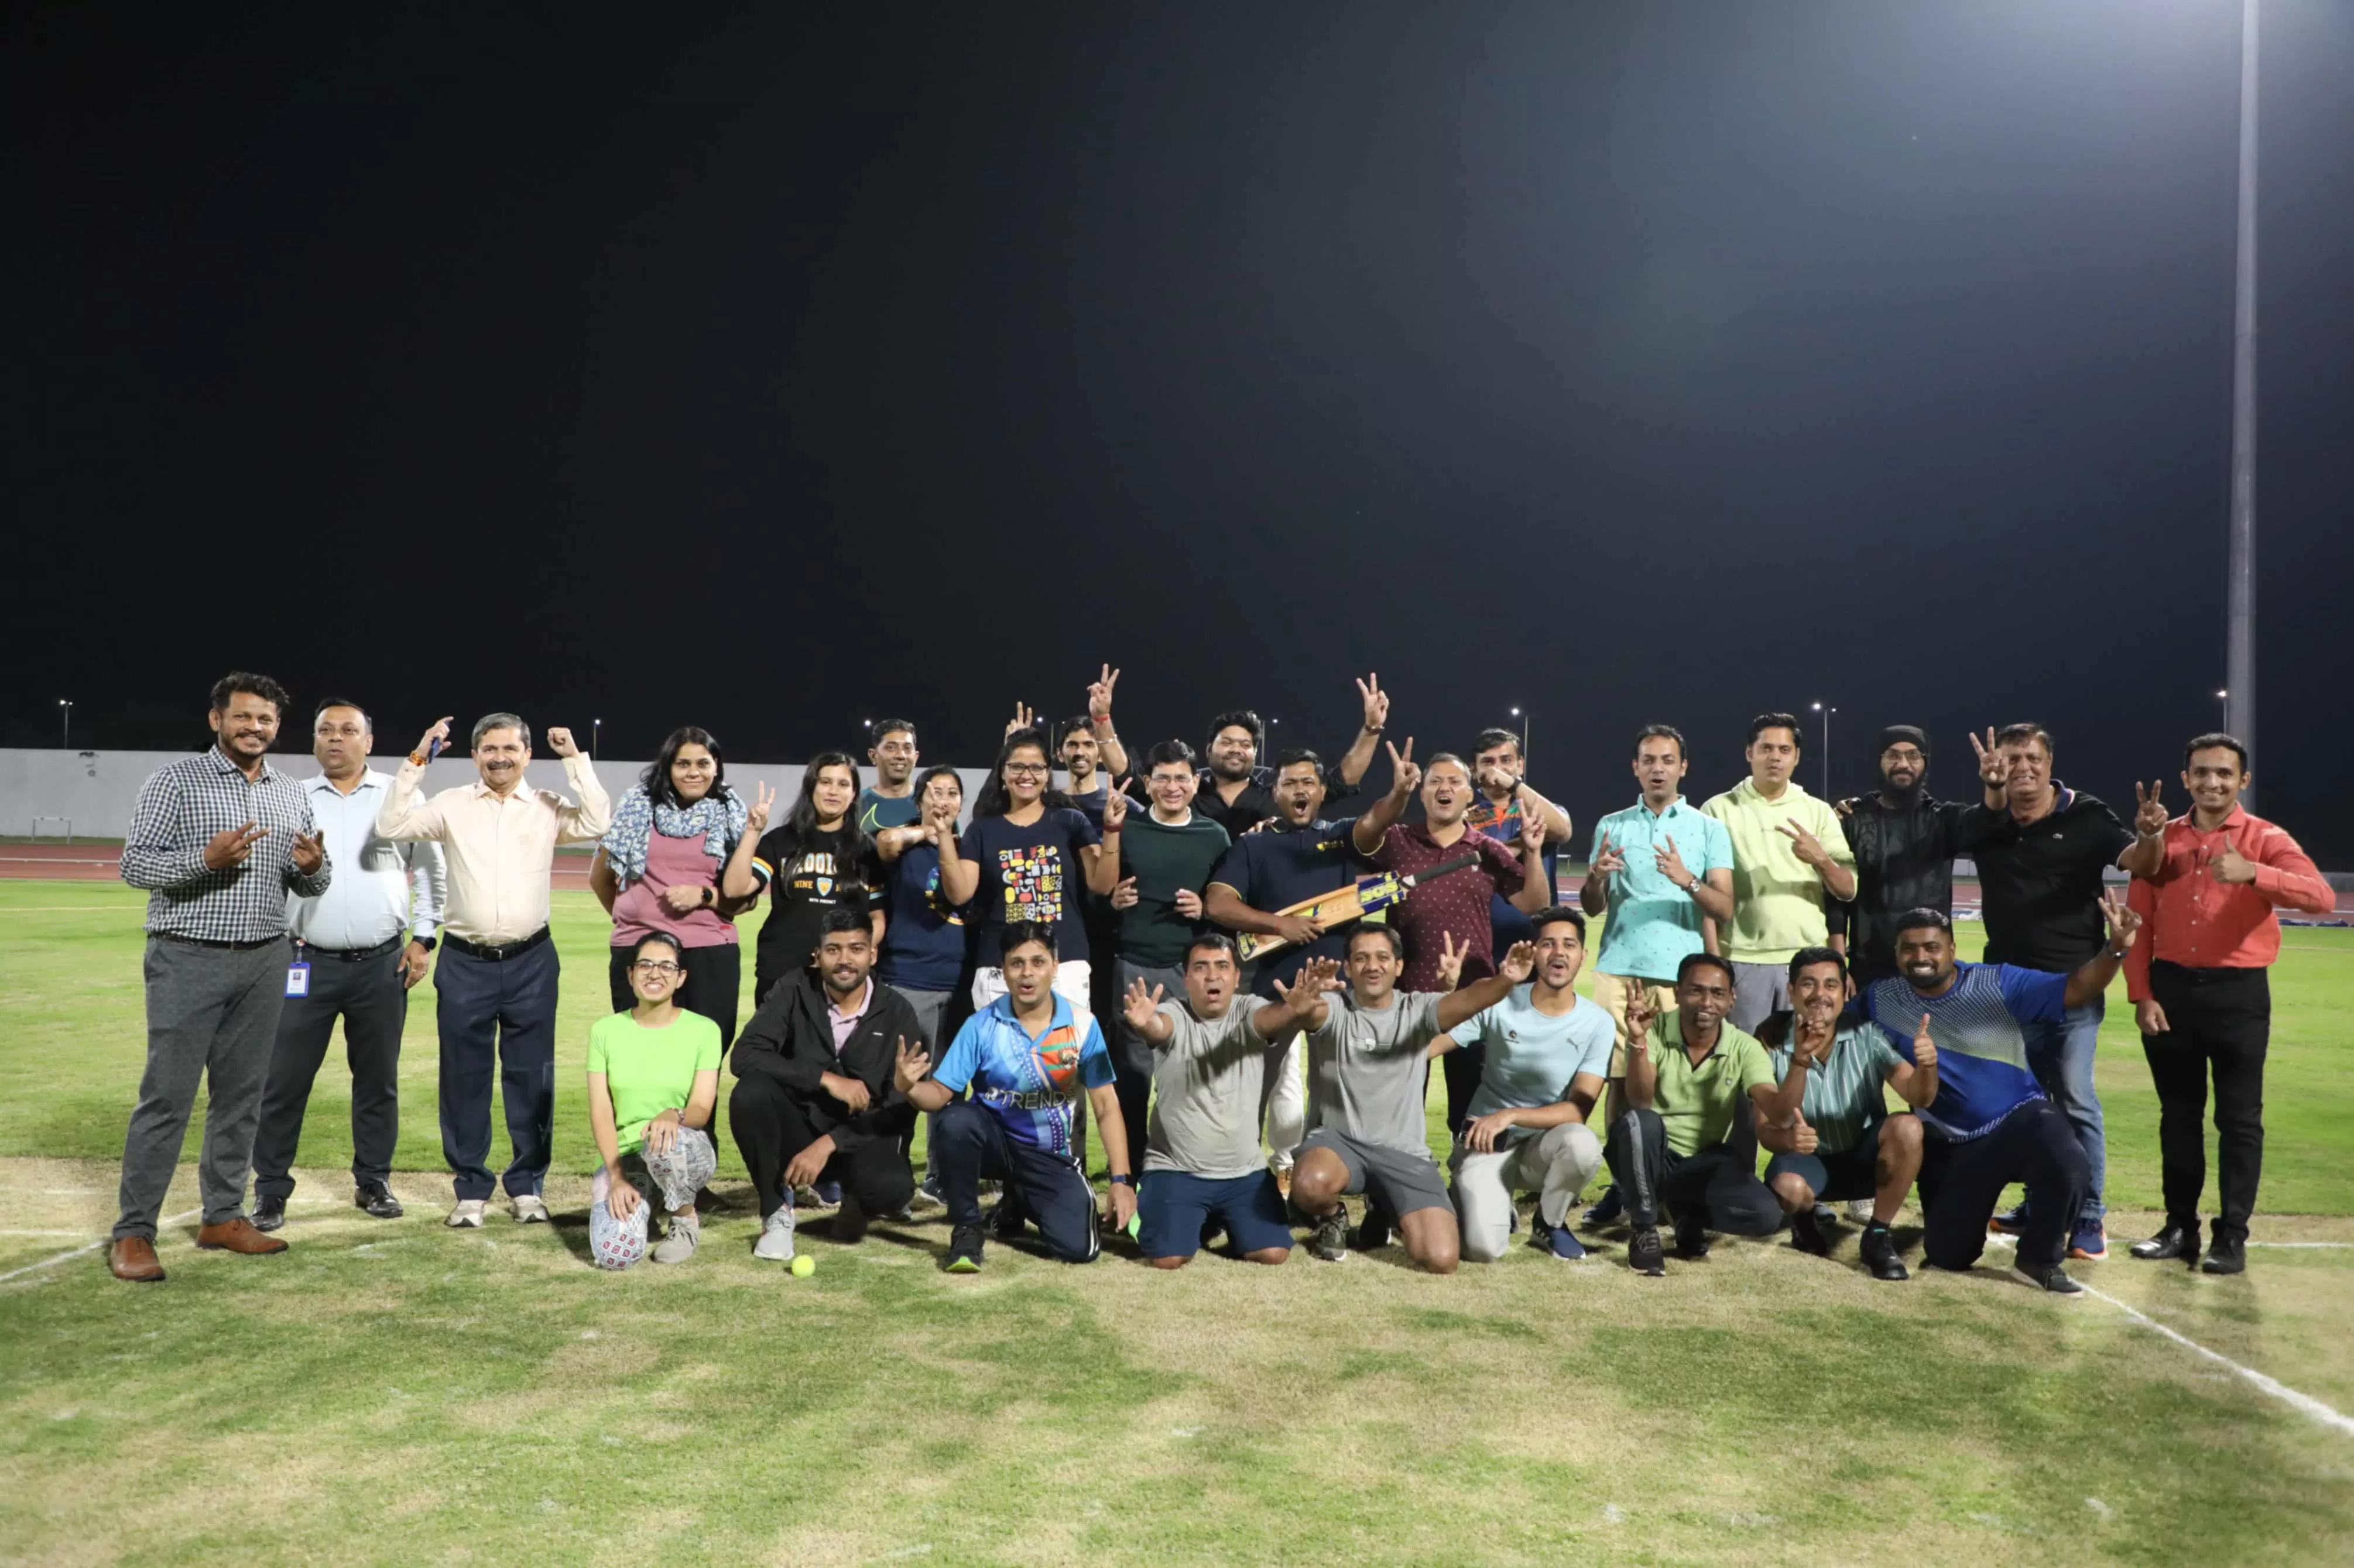 End of cricket match and pose for photograph